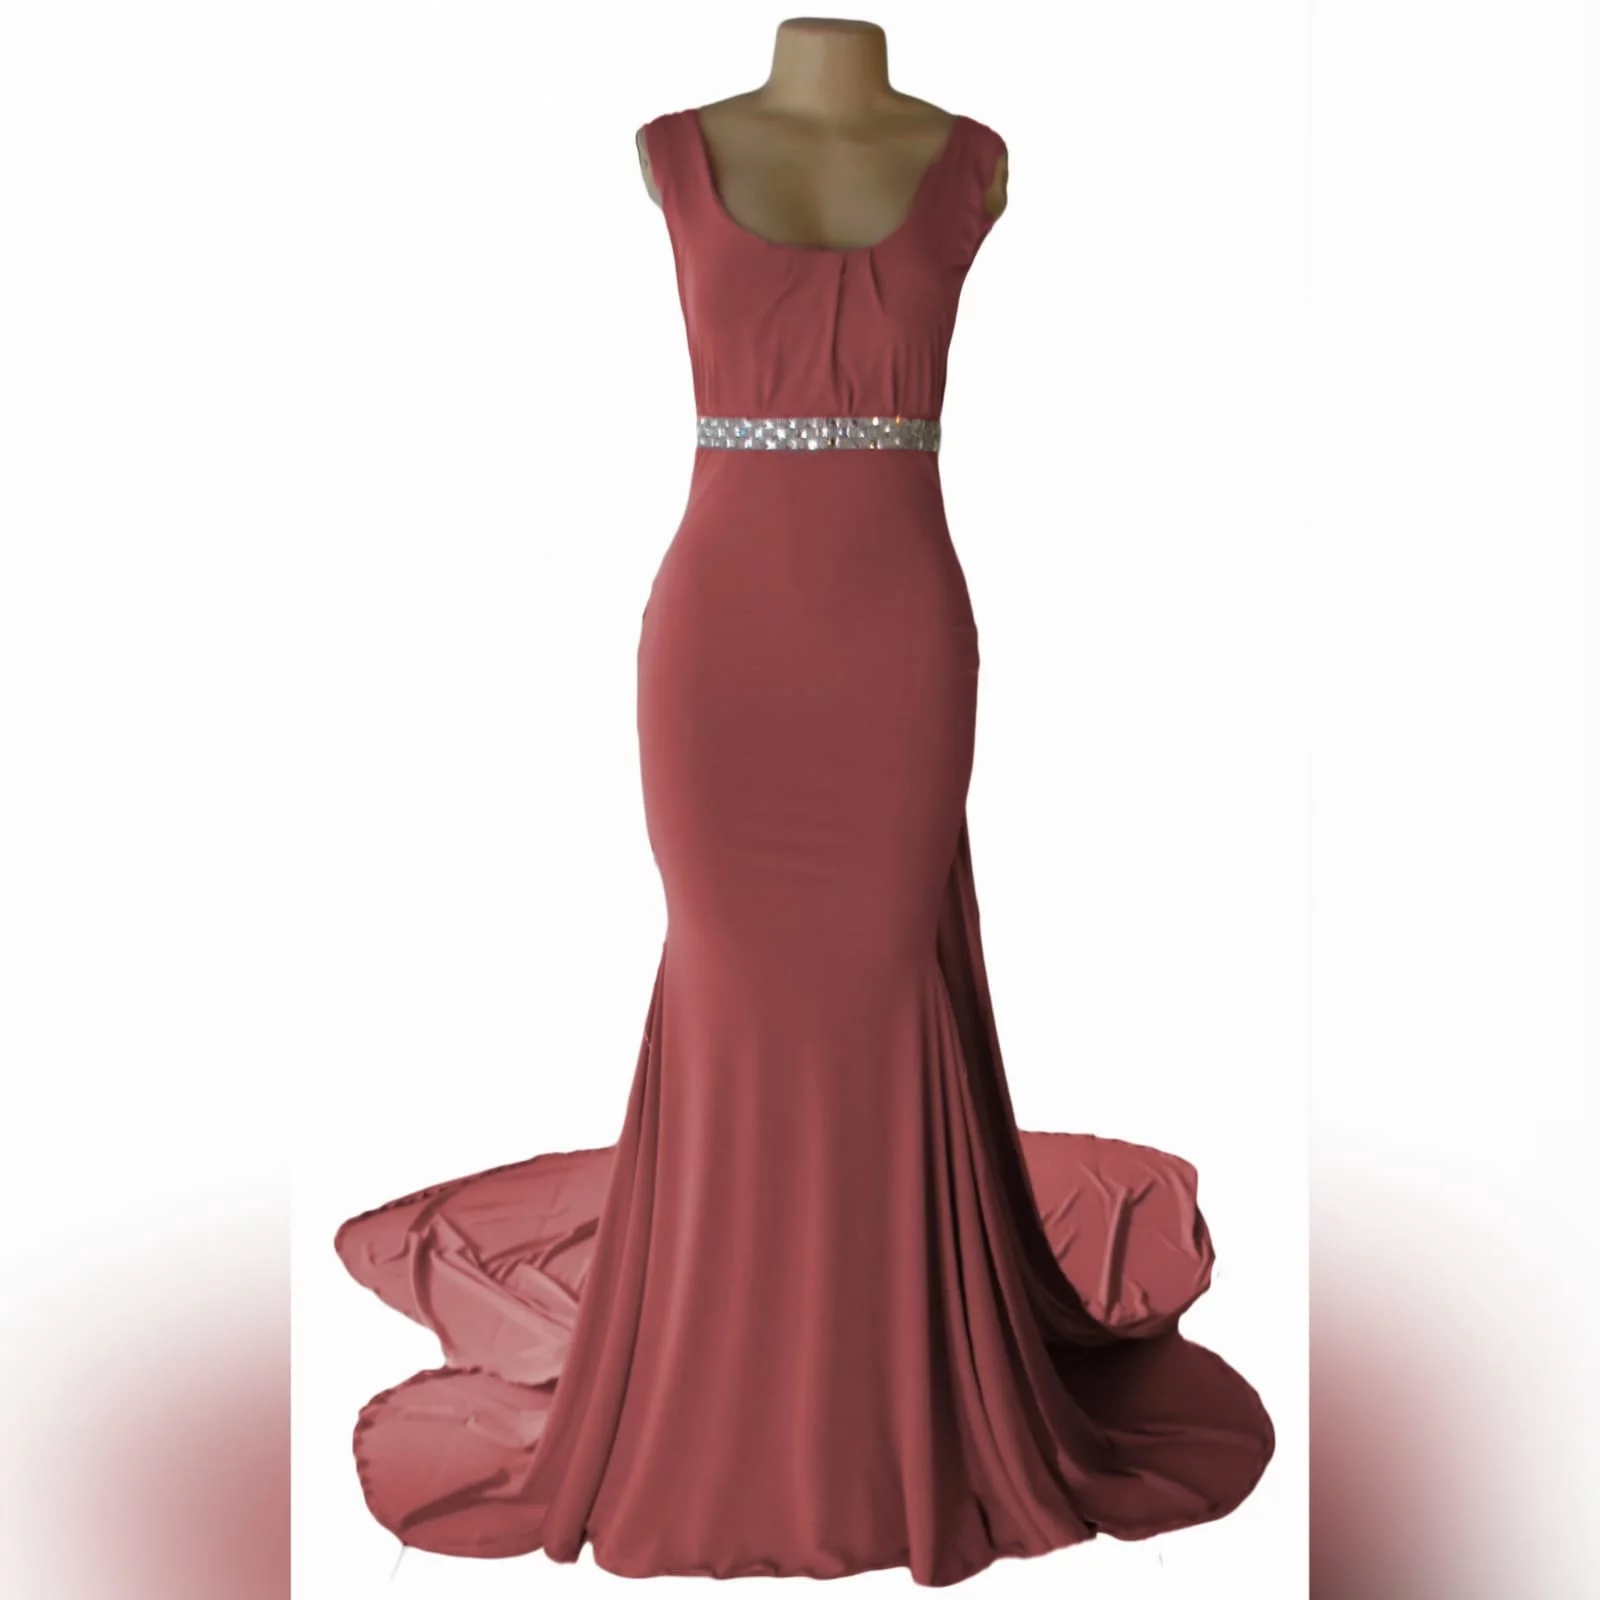 Dusty pink soft mermaid formal dress 3 this dusty pink soft mermaid formal dress was specially made for a prom dance. With a slight gather on the bodice and a rounded neckline. Dress has a double train. The long train is attached to the beaded removable belt.